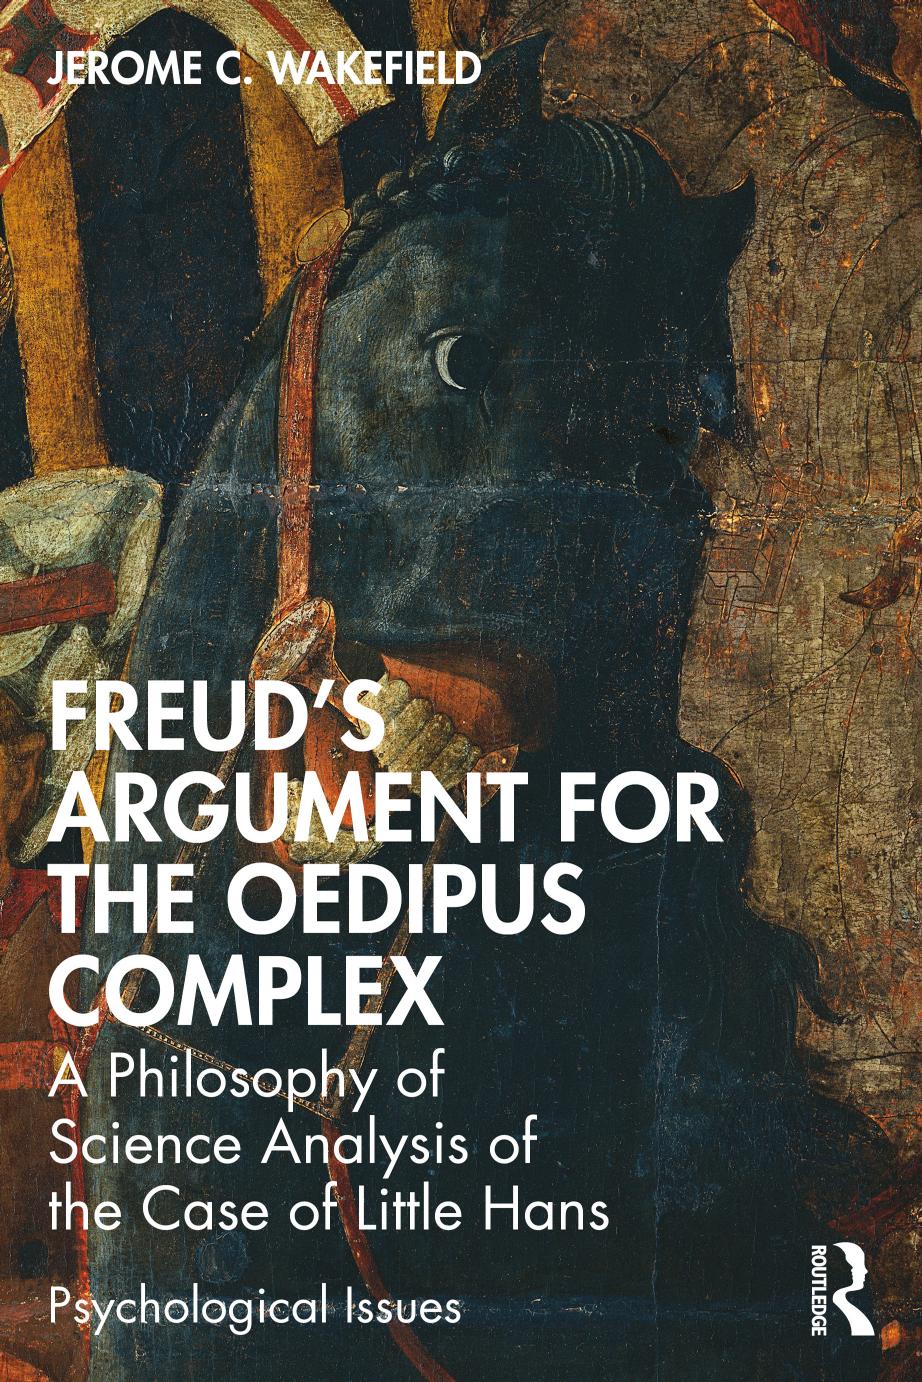 Freud's Argument for the Oedipus Complex: A Philosophy of Science Analysis of the Case of Little Hans by Jerome C. Wakefield